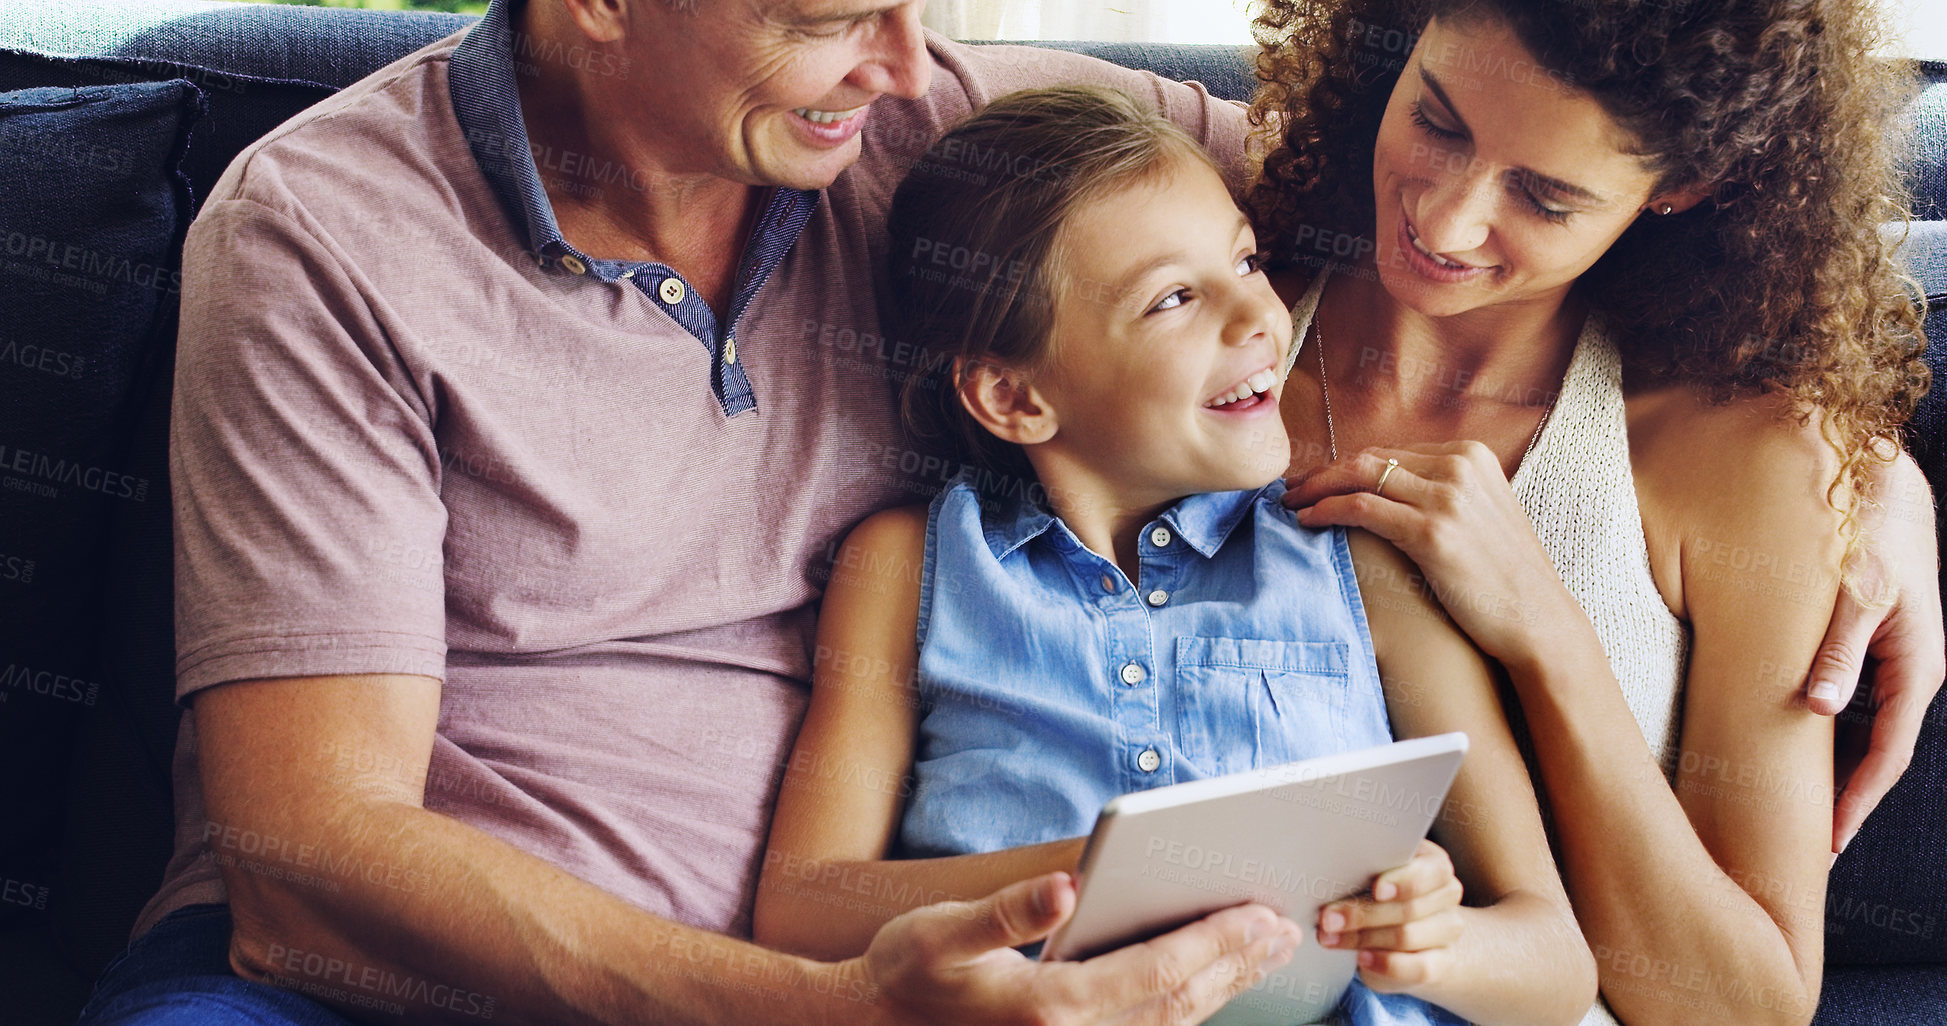 Buy stock photo Shot of a cute little girl using a digital tablet with her mother and father on the sofa at home